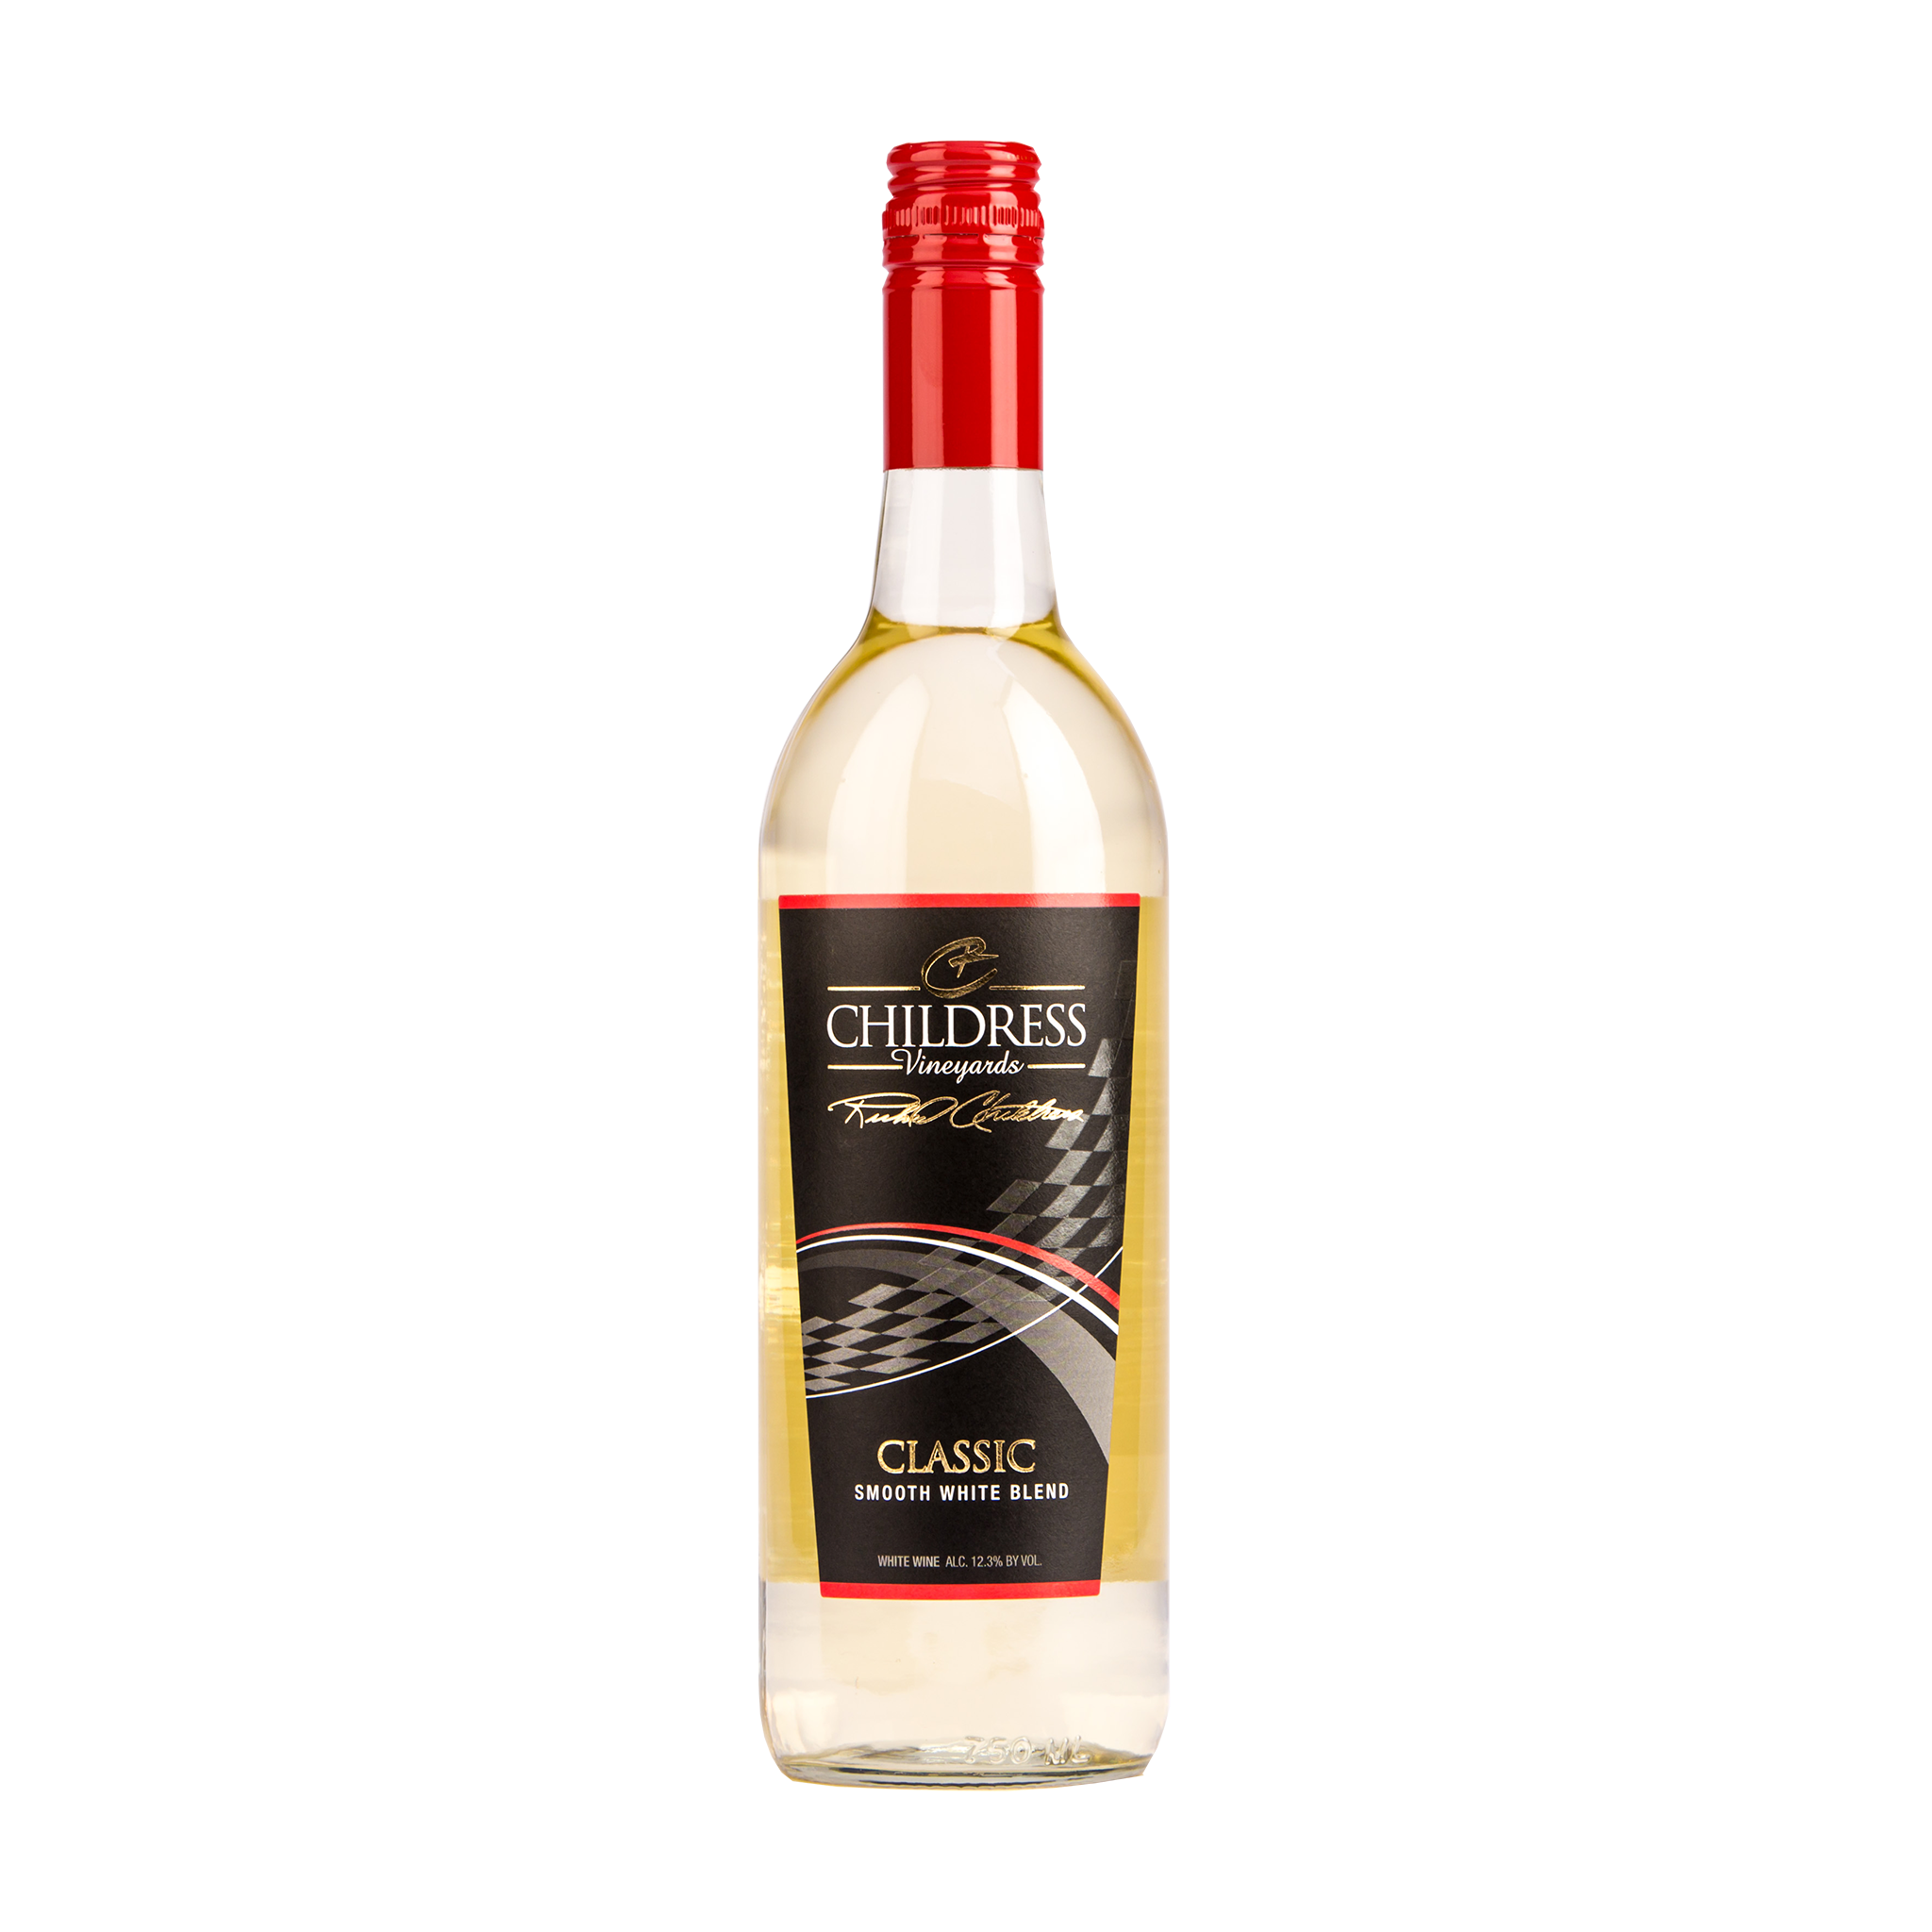 Childress Vineyards and Winery Classic Smooth White Wine Blend